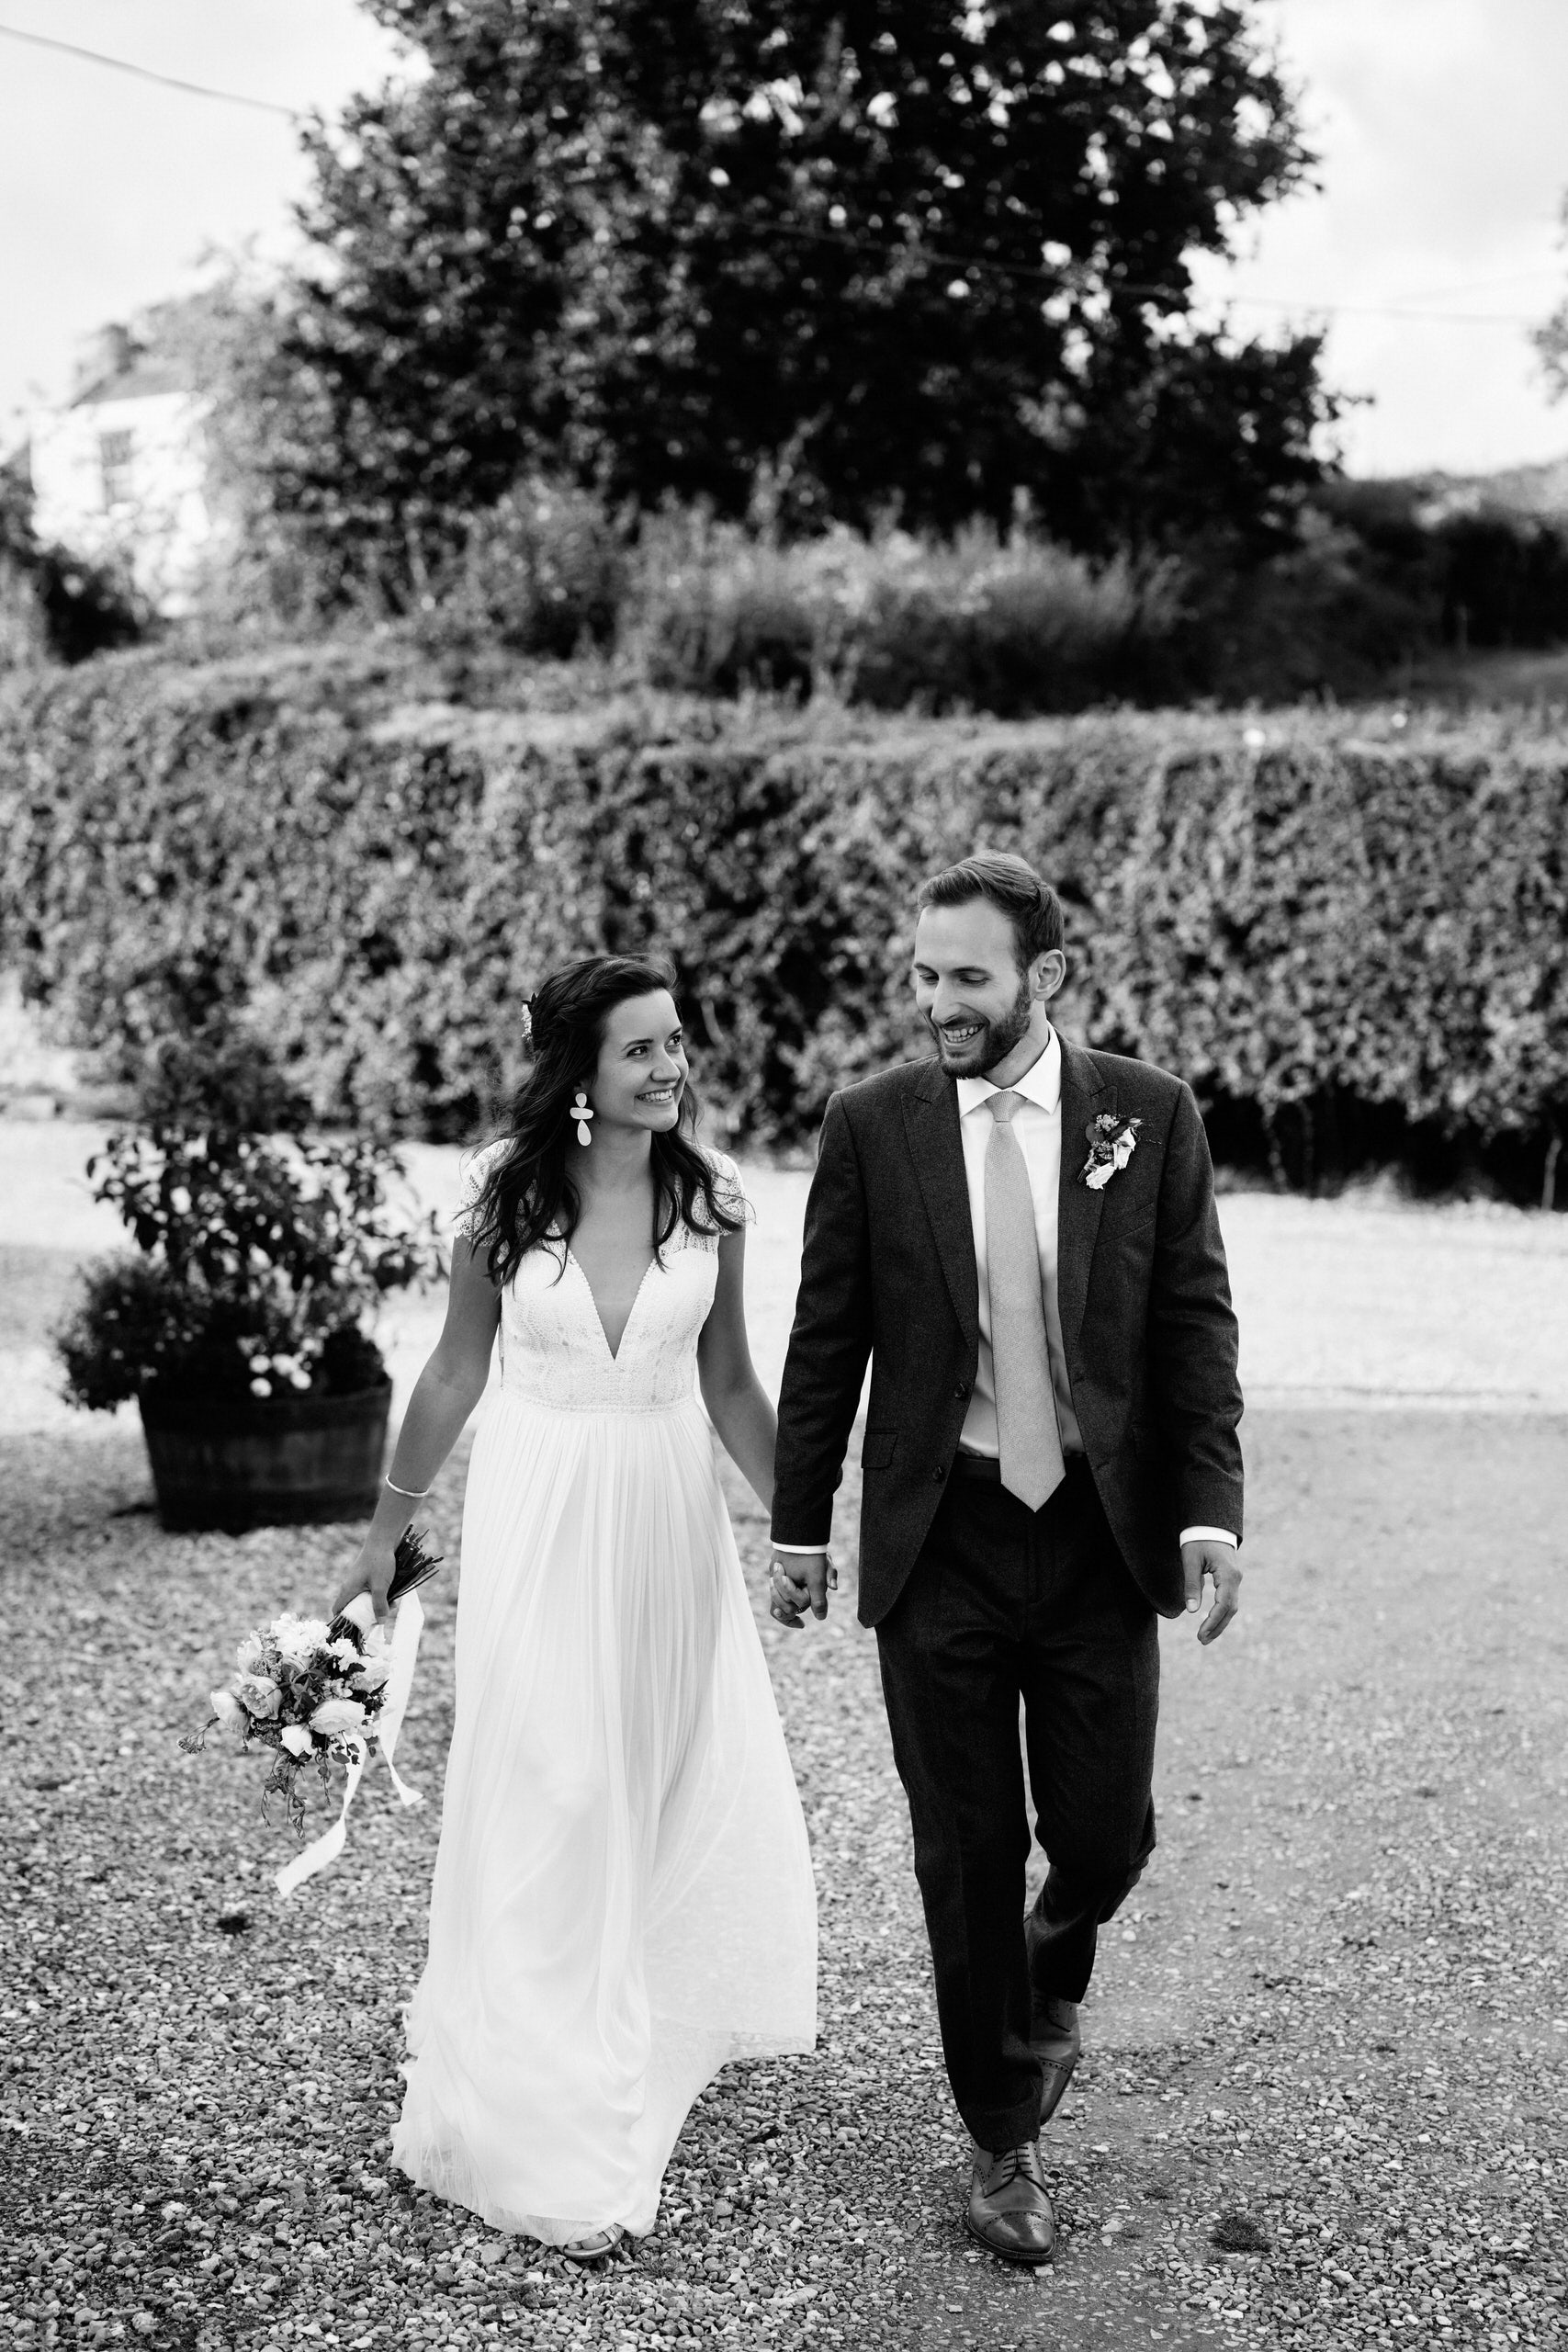 A black and white picture of a newly married couple walking down a path.